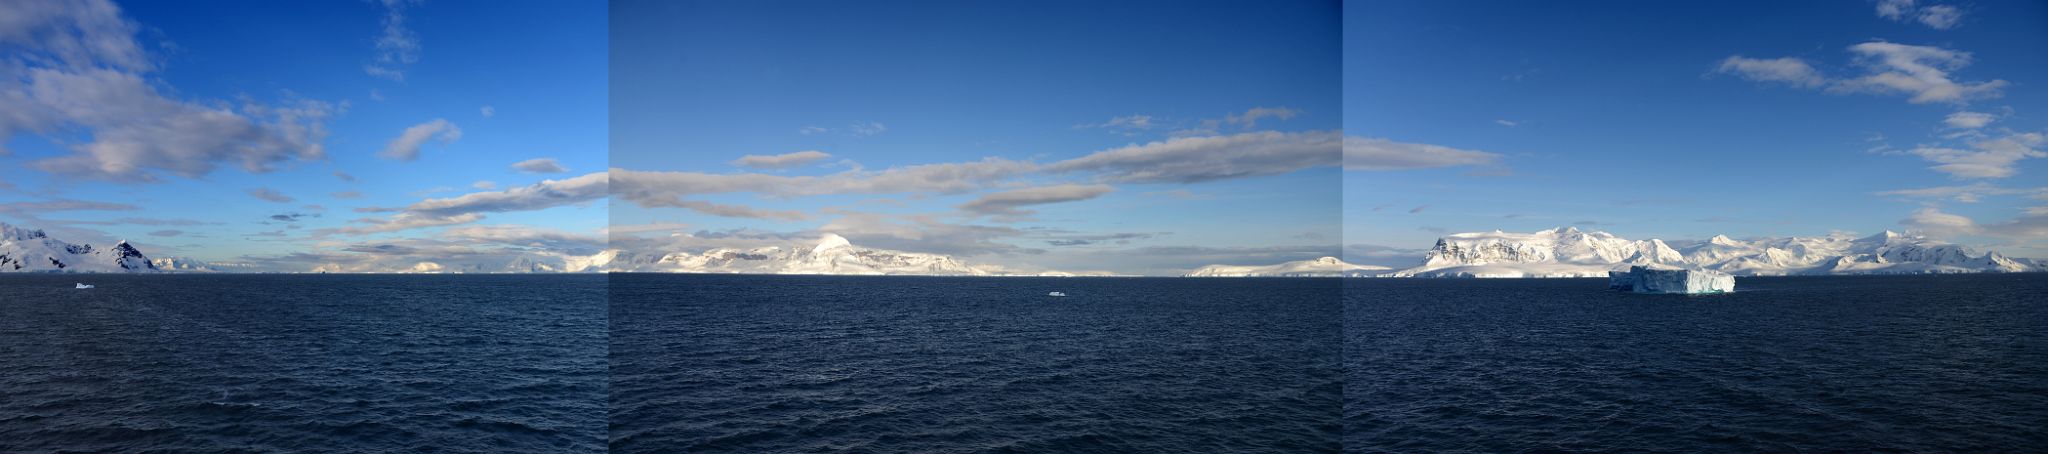 01A Panoramic View Of Mountainous Islands From Quark Expeditions Antarctica Cruise Ship Nearing Cuverville Island